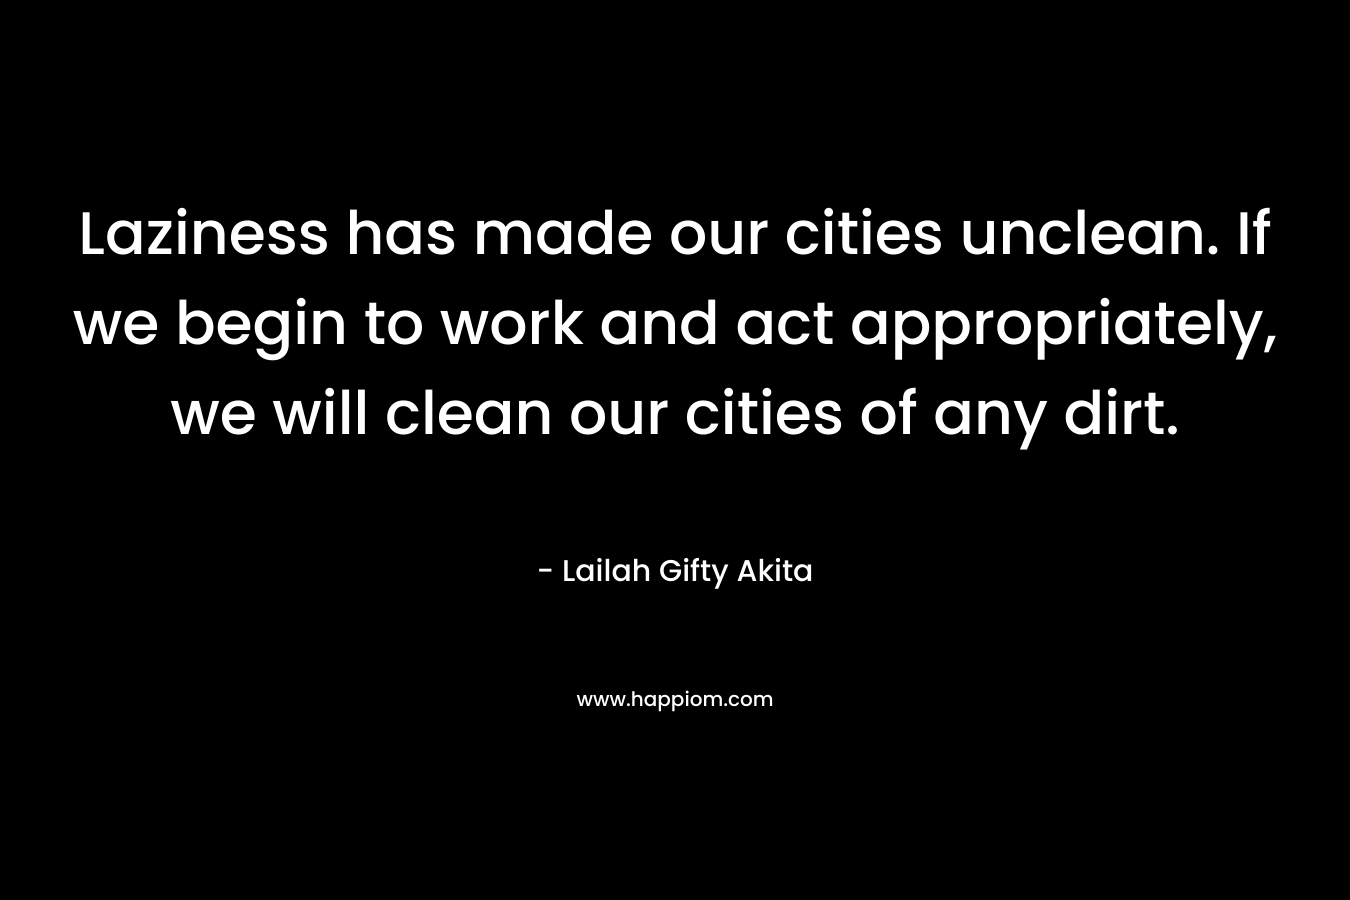 Laziness has made our cities unclean. If we begin to work and act appropriately, we will clean our cities of any dirt. – Lailah Gifty Akita